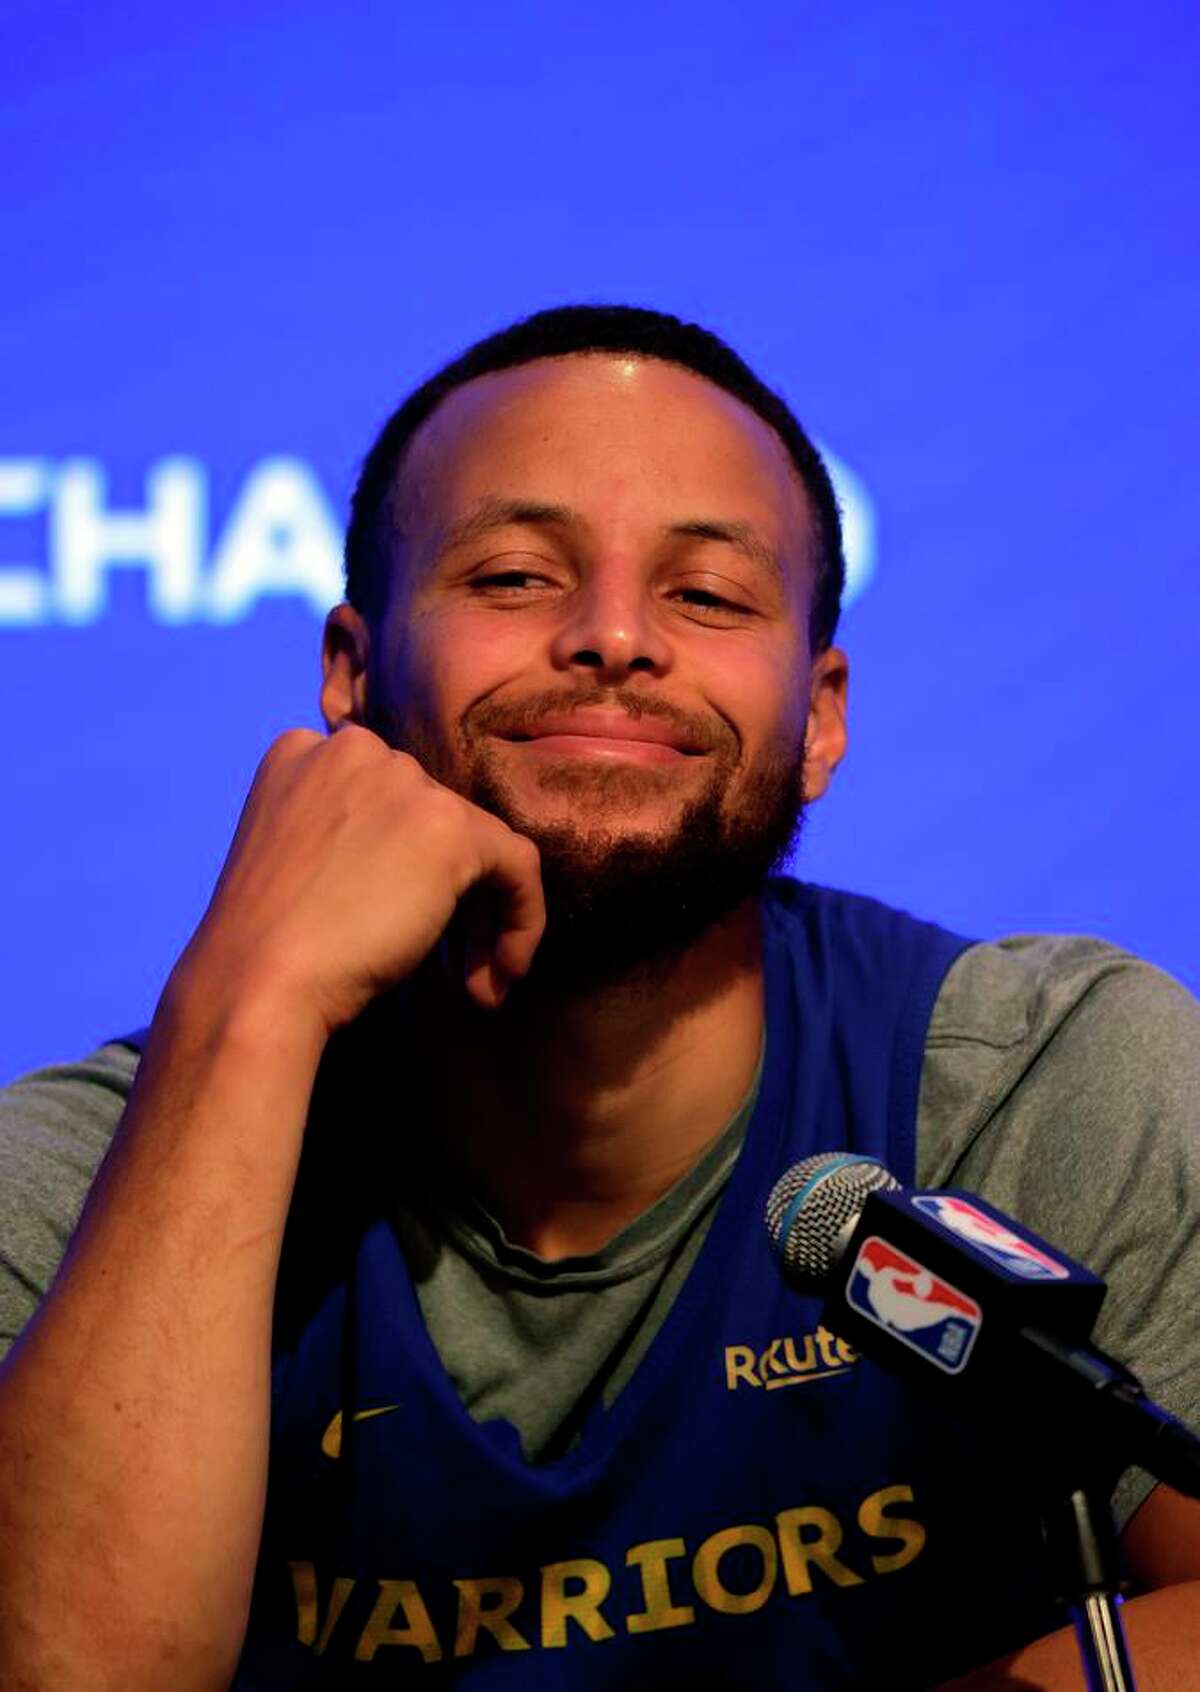 These finals will give Stephen Curry a chance to attain the elusive Finals MVP honor.